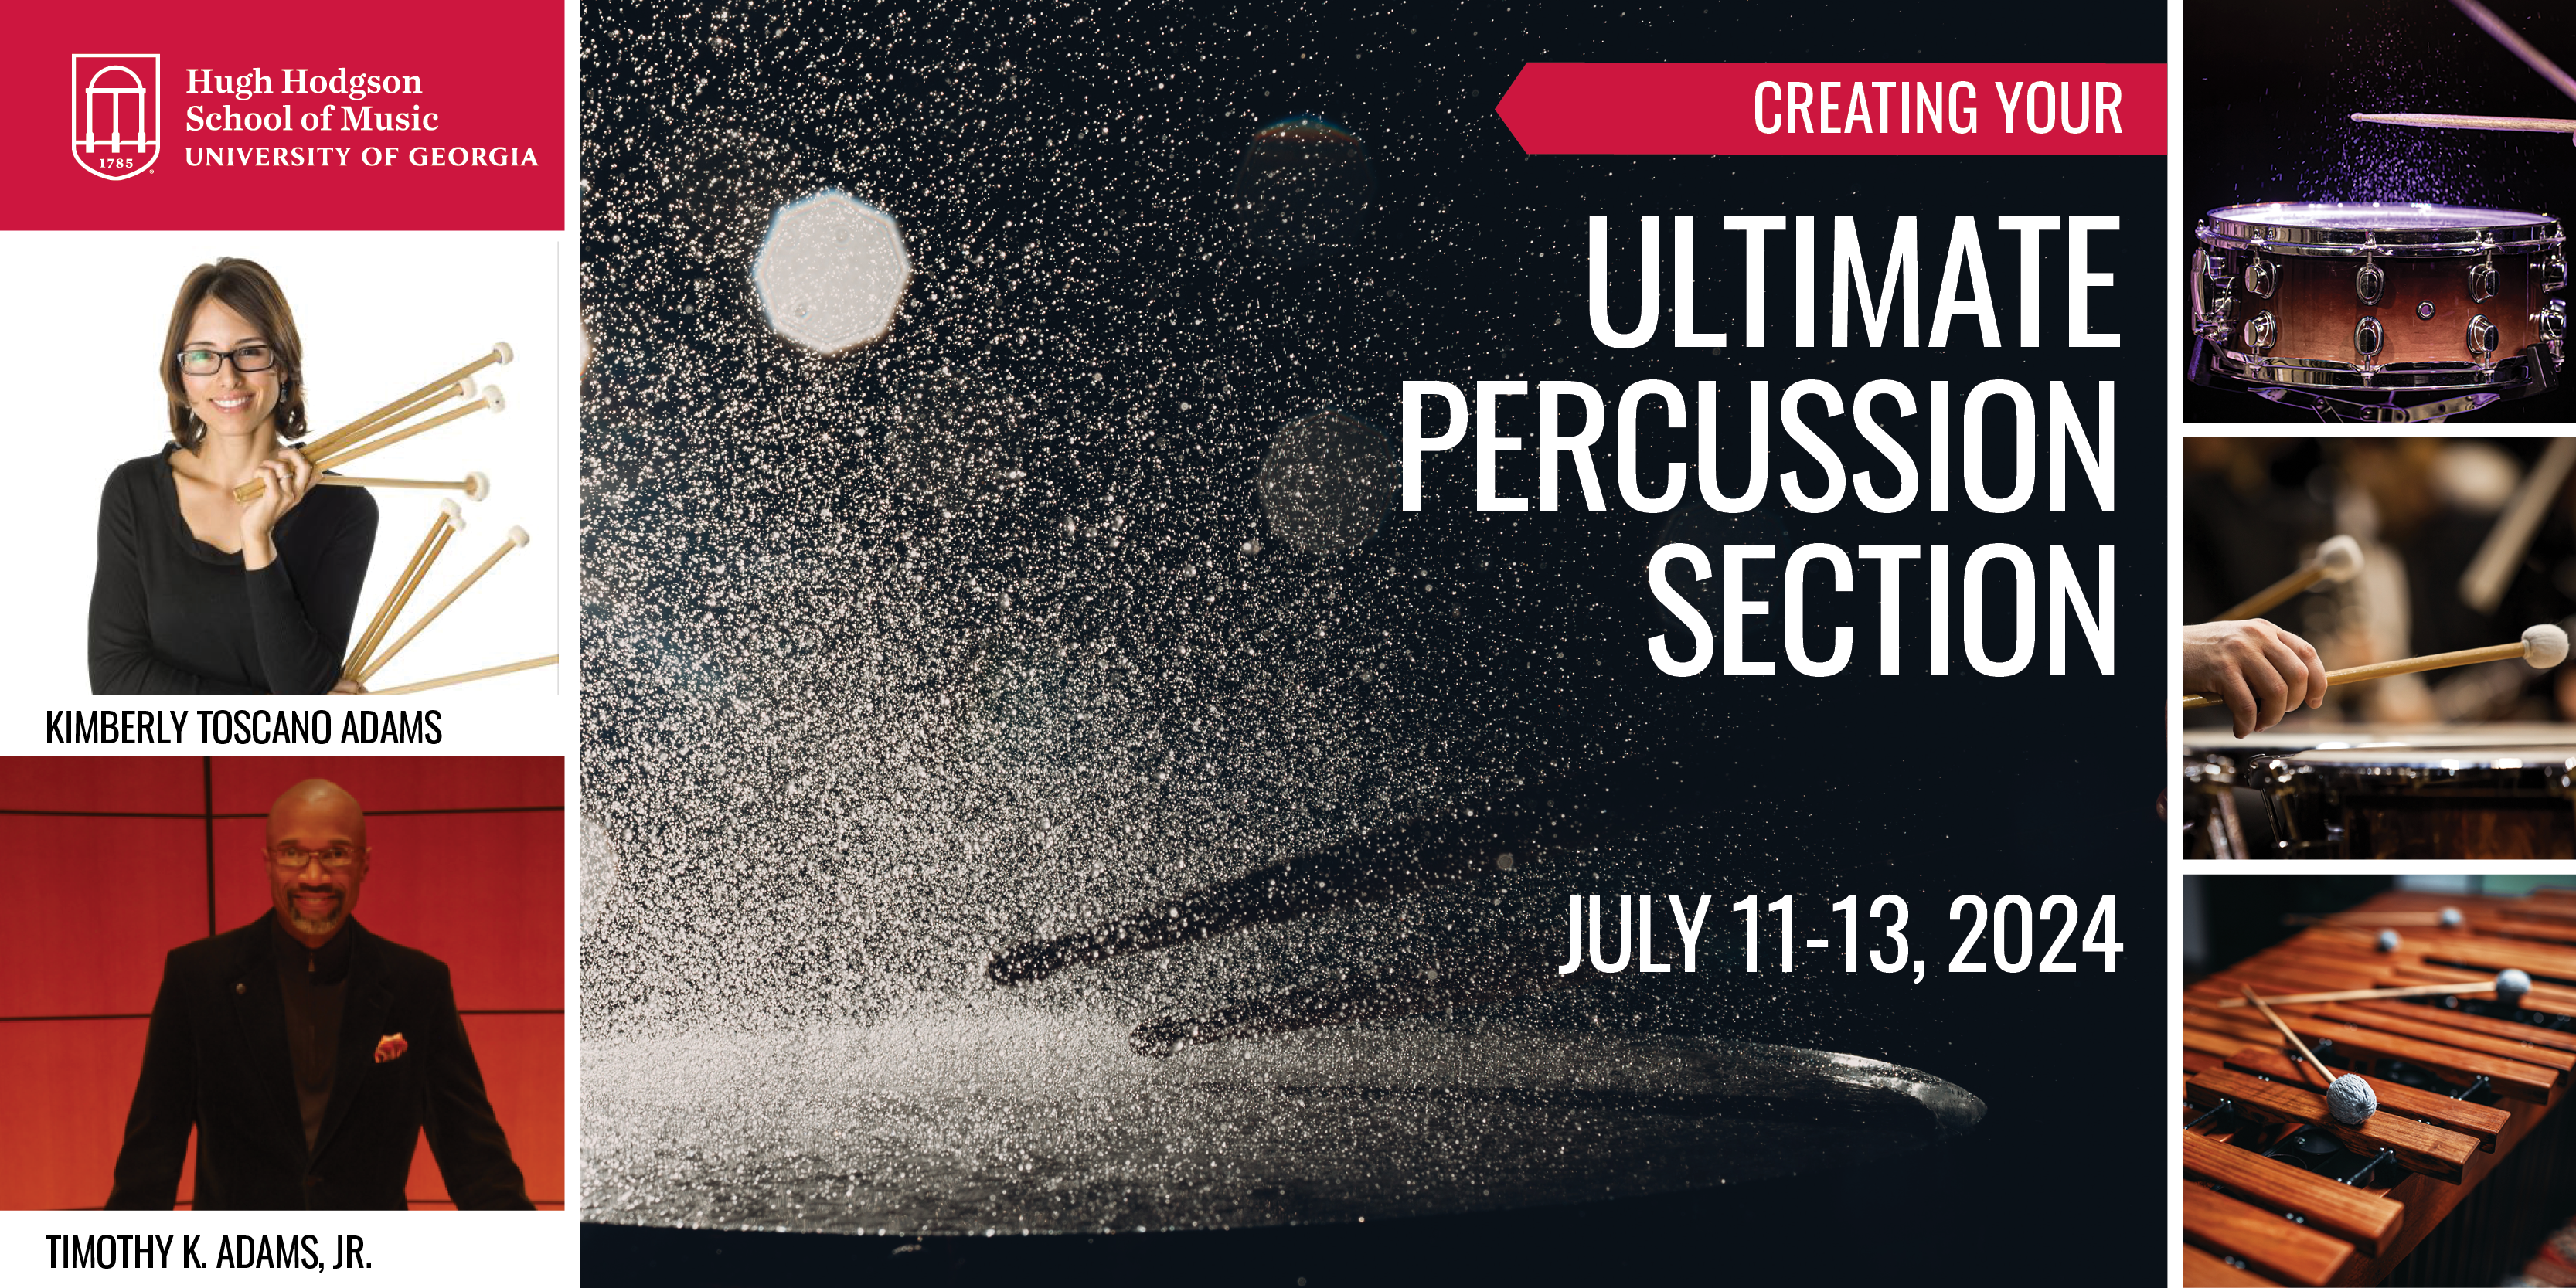 Create your Ultimate Percussion Section, July 11-13, 2024